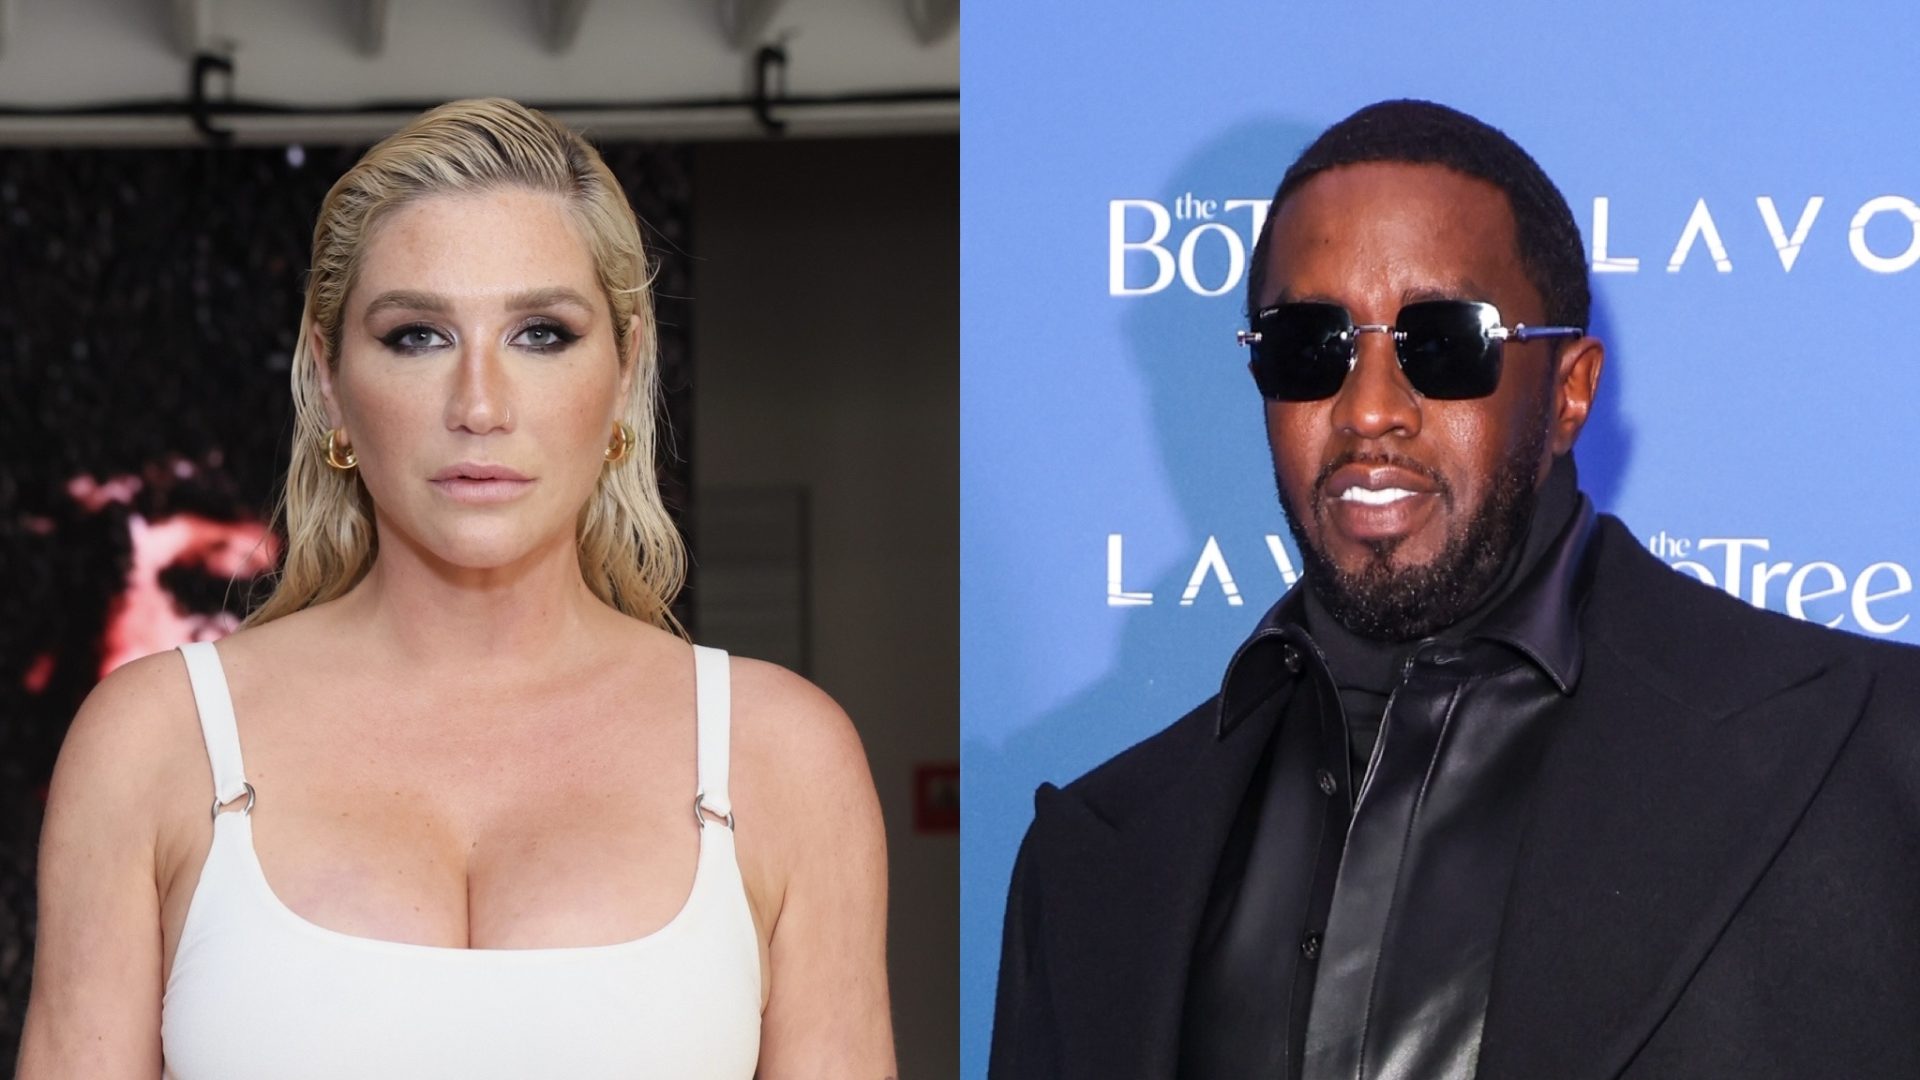 Oop! Kesha Goes Viral After Changing The Lyrics In Her Song ‘TiK ToK’ To Say THIS About Diddy (WATCH)